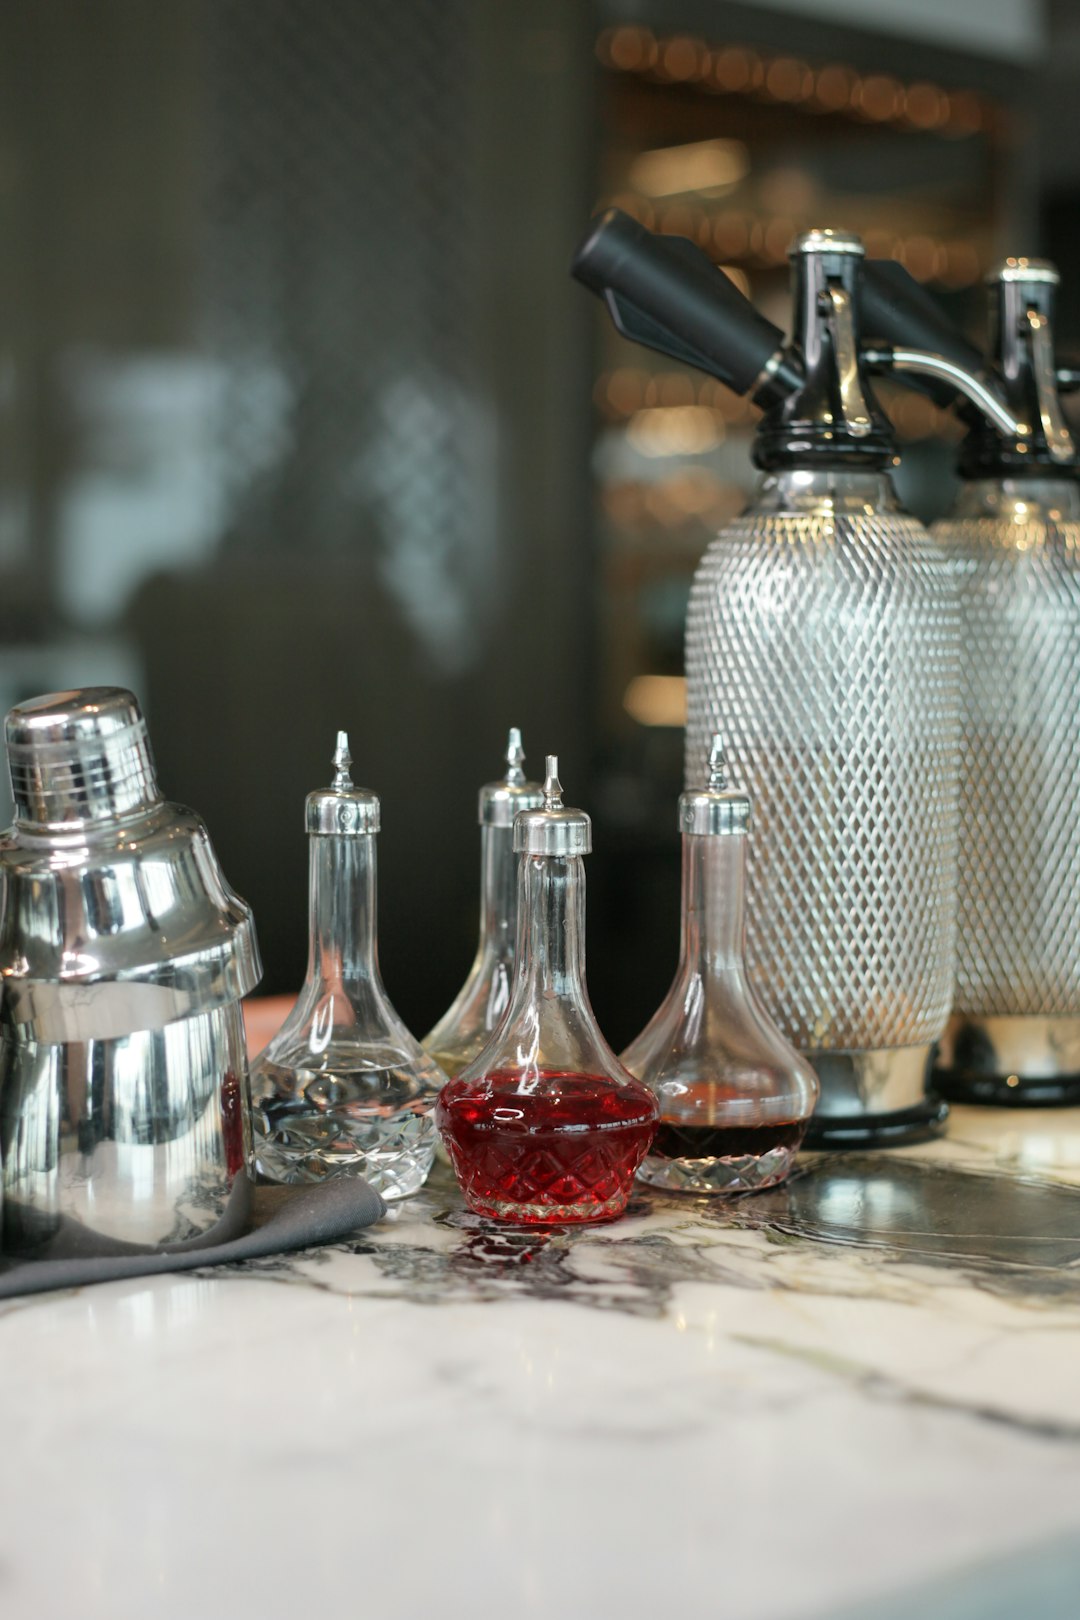 stainless steel condiment shaker beside red wine glass